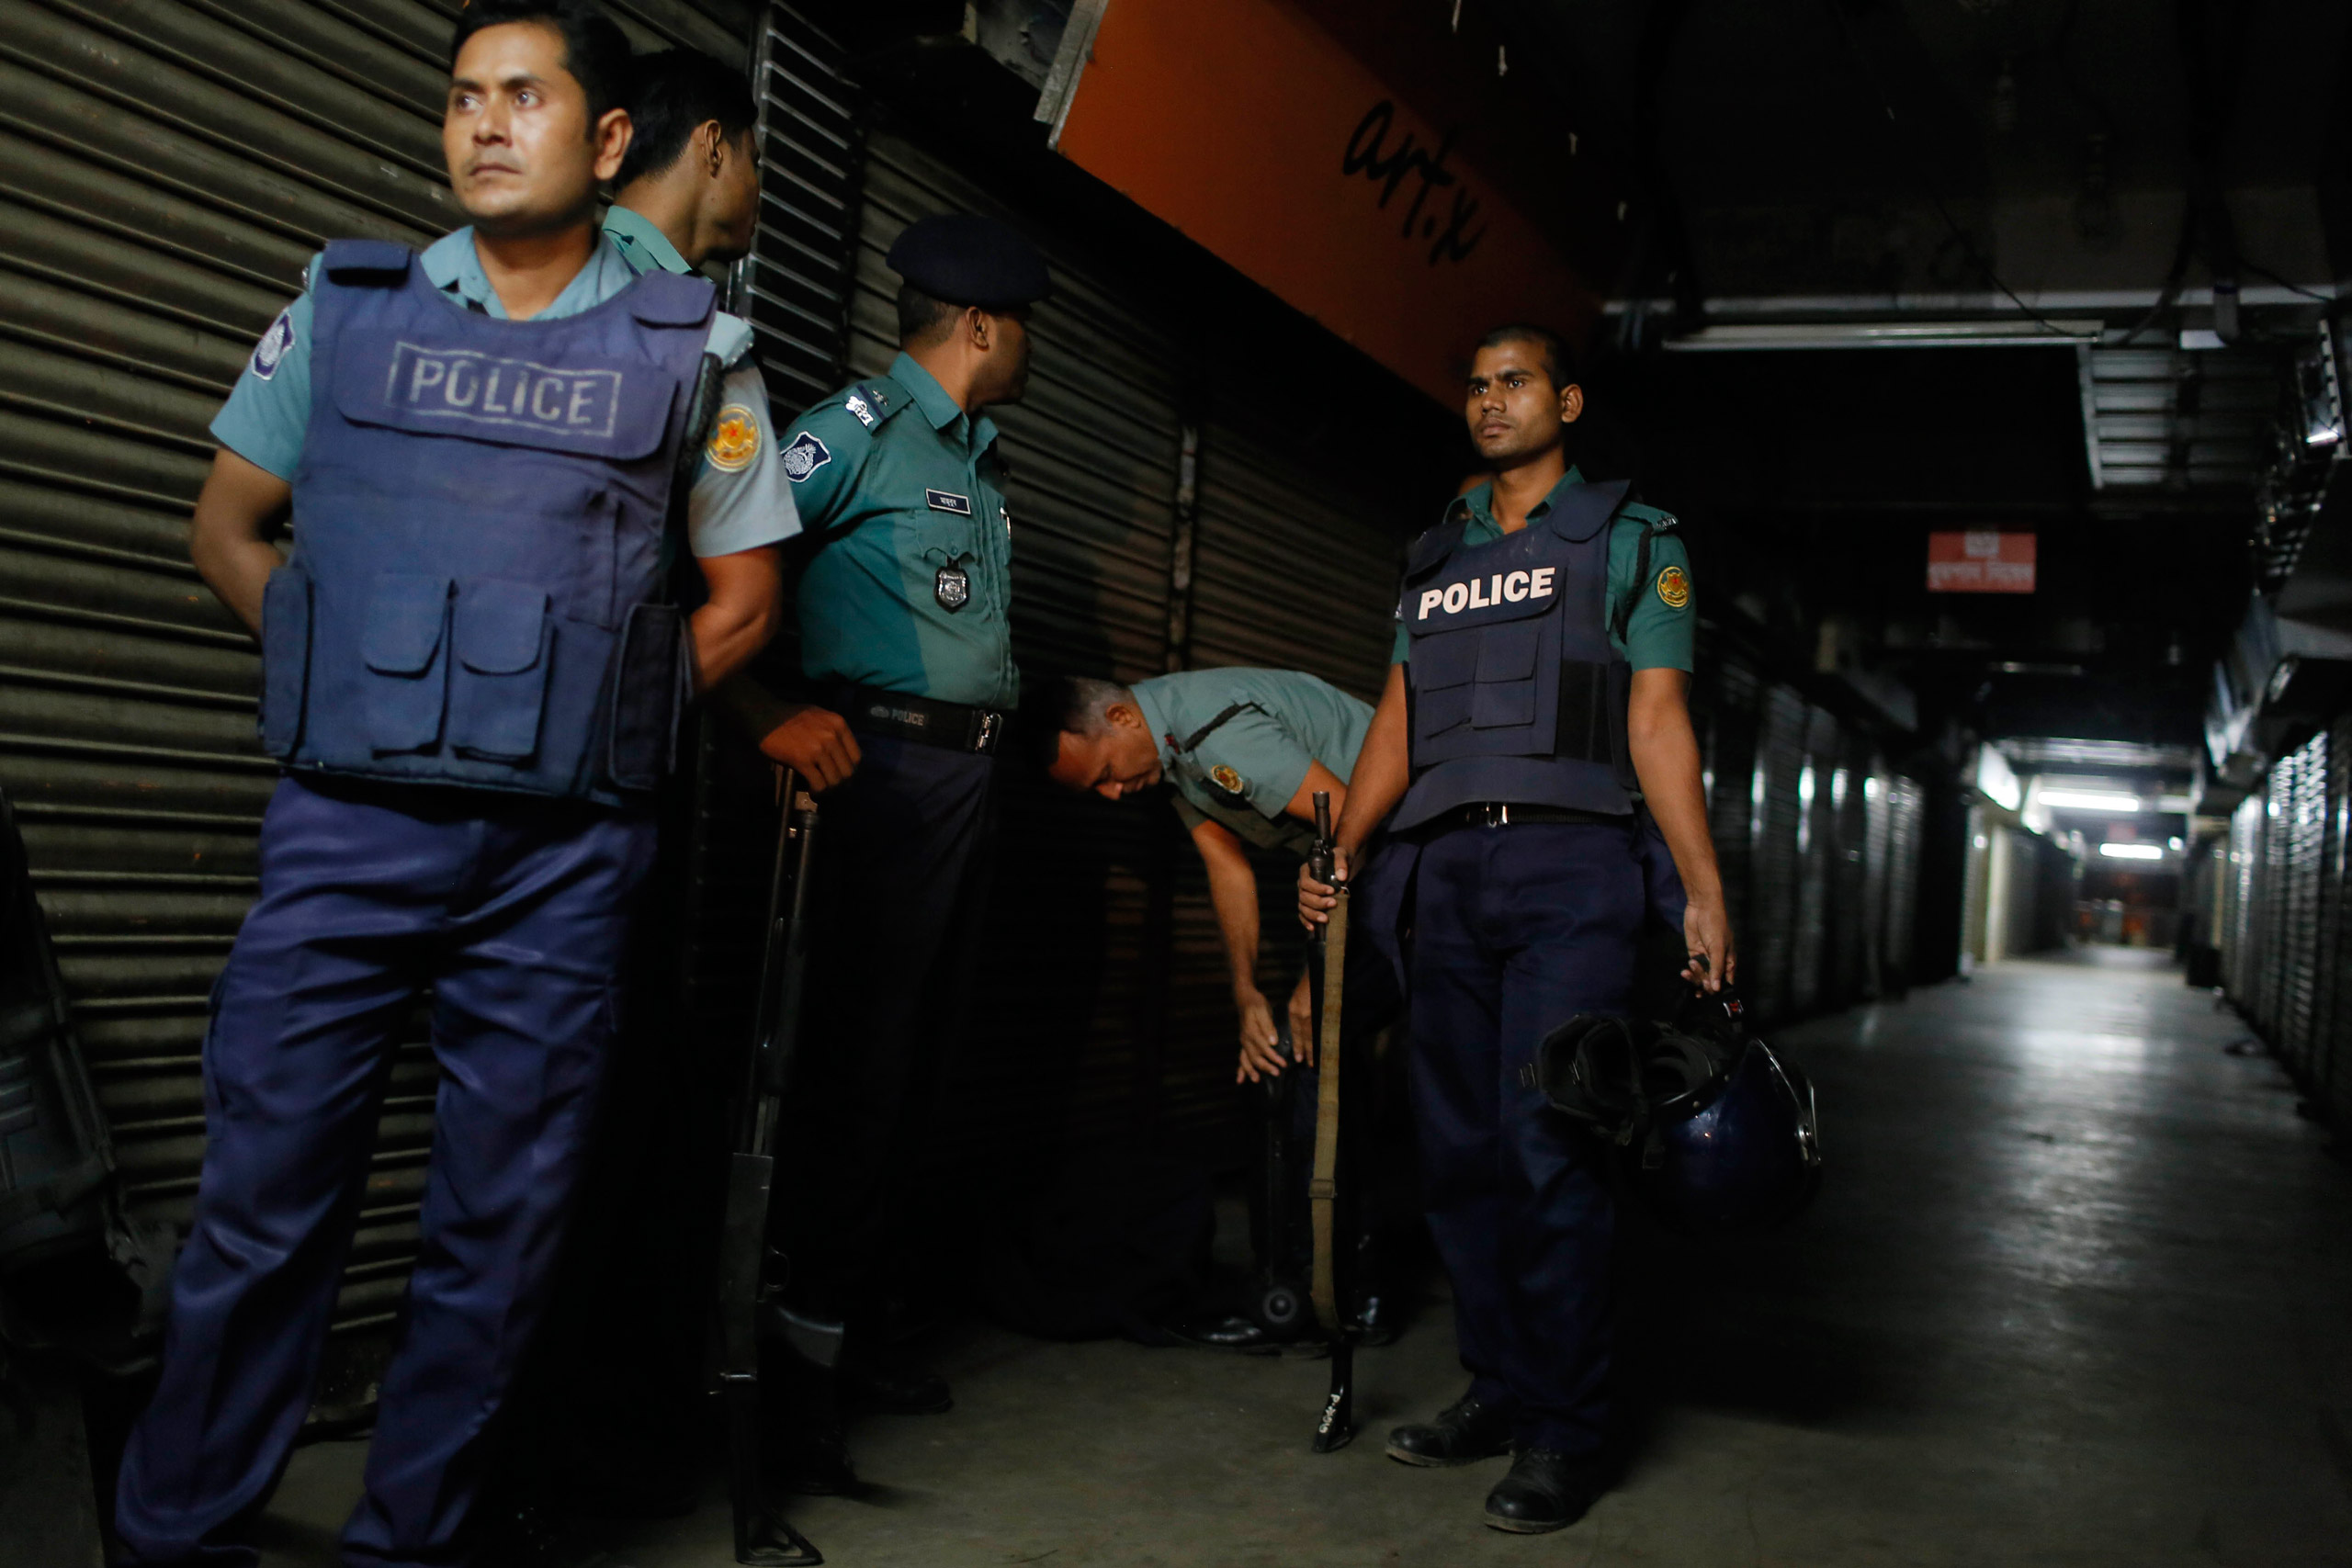 Bangladeshi security officers stand guard at the site where the slaughtered body of Faisal Arefin Deepan was found in Dhaka, Bangladesh, Saturday, Oct. 31, 2015. The publisher of secular books was hacked to death and three other people were wounded in two separate attacks Saturday at publishing houses in Bangladesh's capital, police said. Both of the publishers involved in Saturday's attacks had published works of Bangladeshi-American blogger and writer Avijit Roy, who was hacked to death on the Dhaka University campus while walking with his wife in February. (AP Photo/A.M. Ahad)